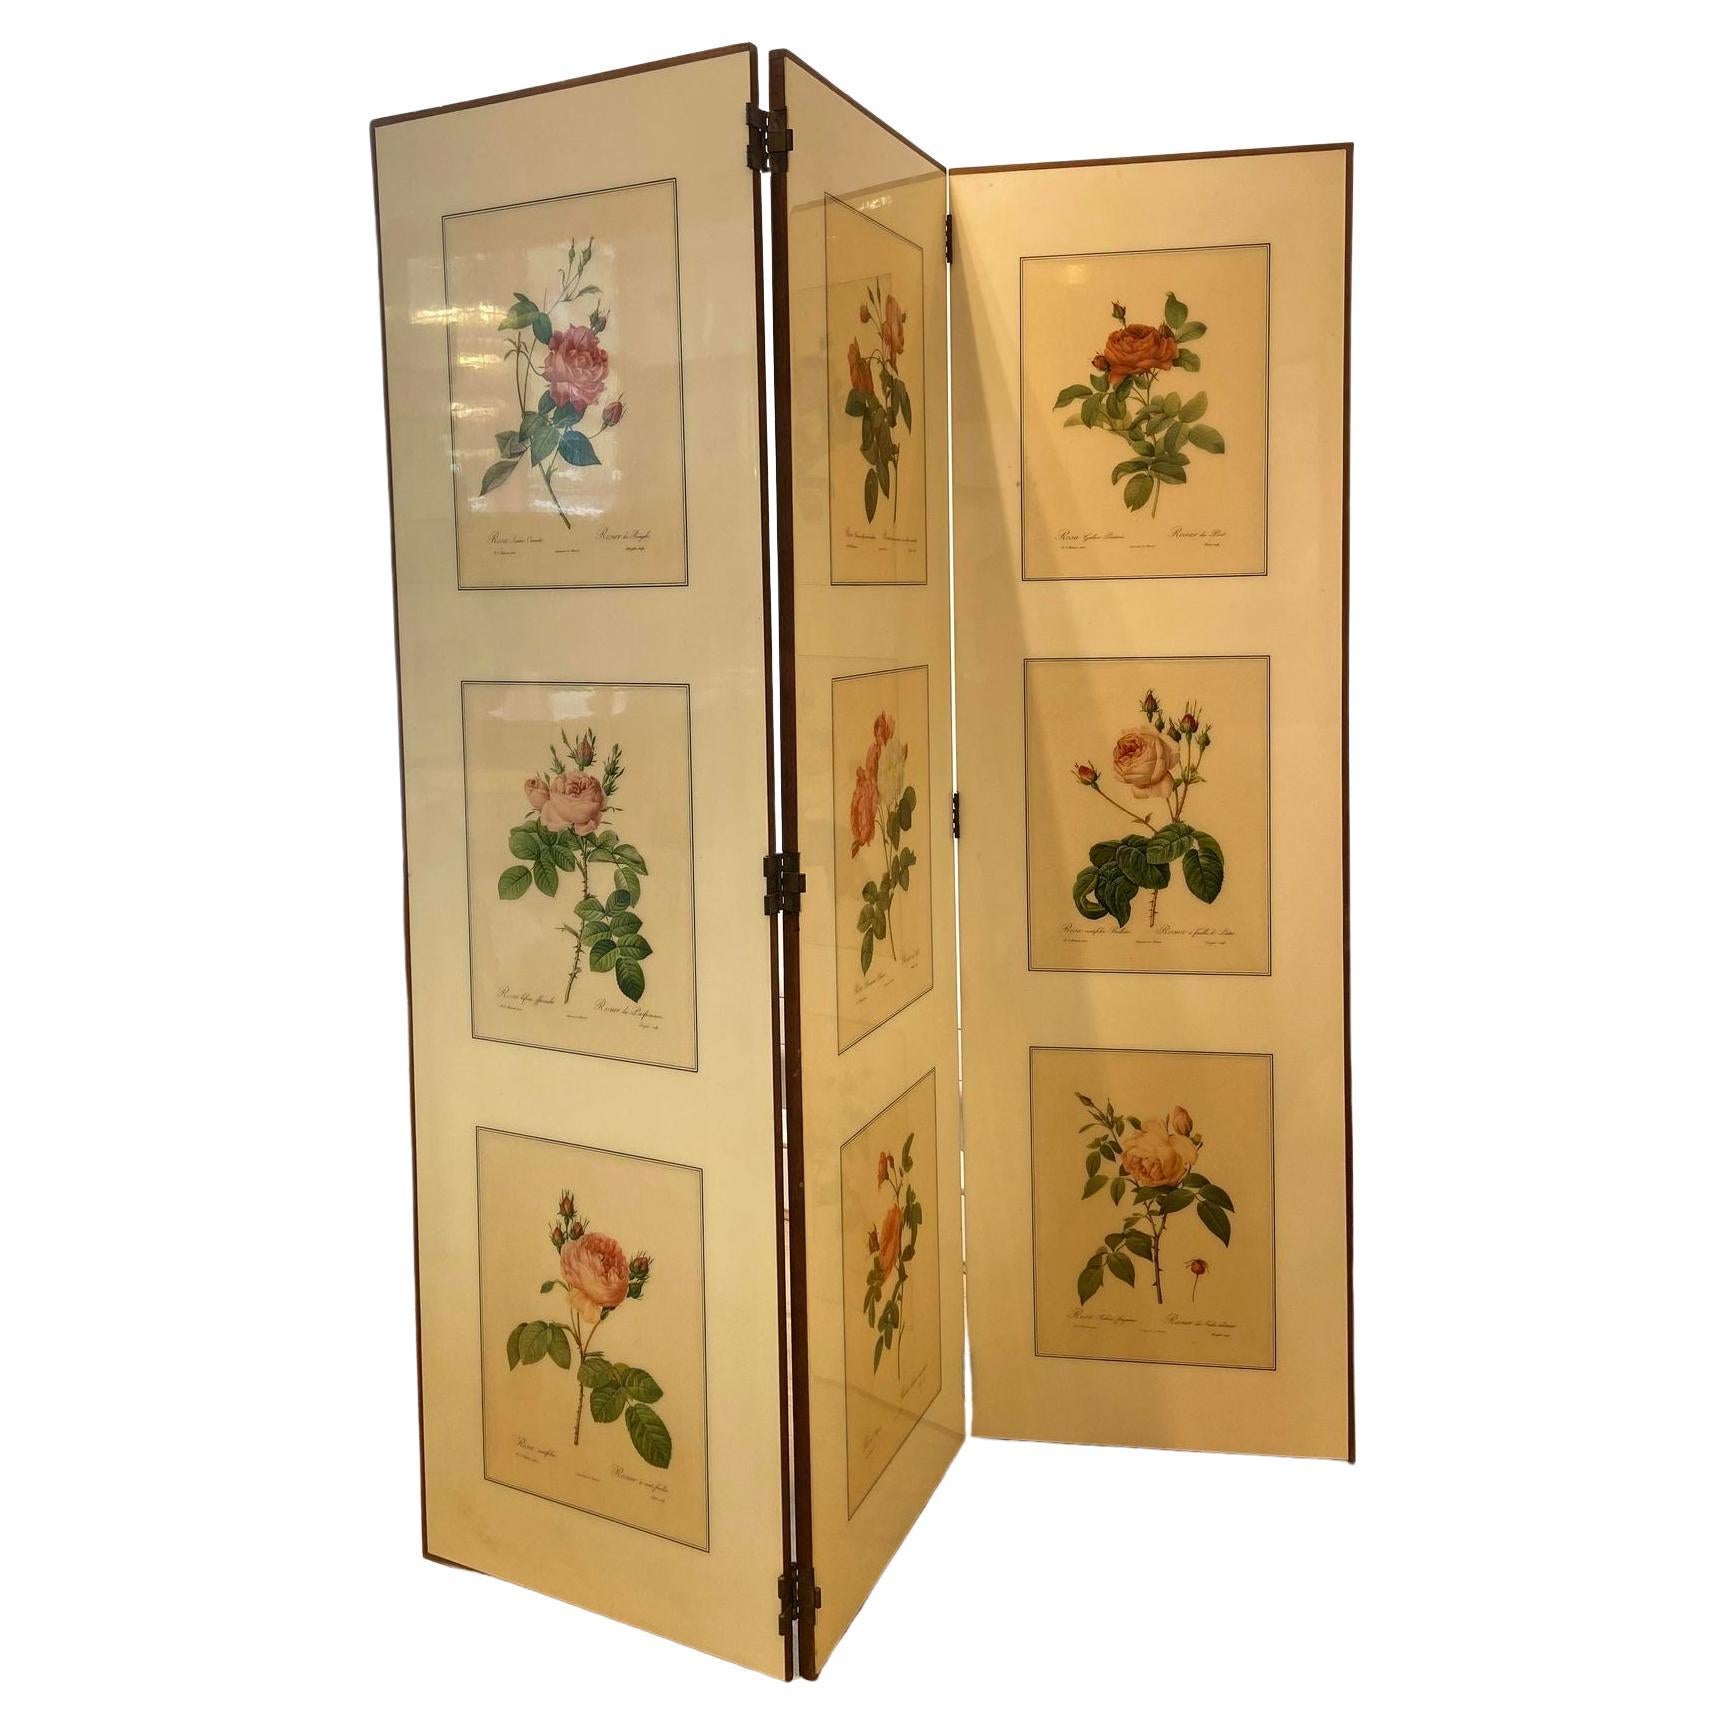 A 1950's folding screen / room divider with Victorian botanical lithographs